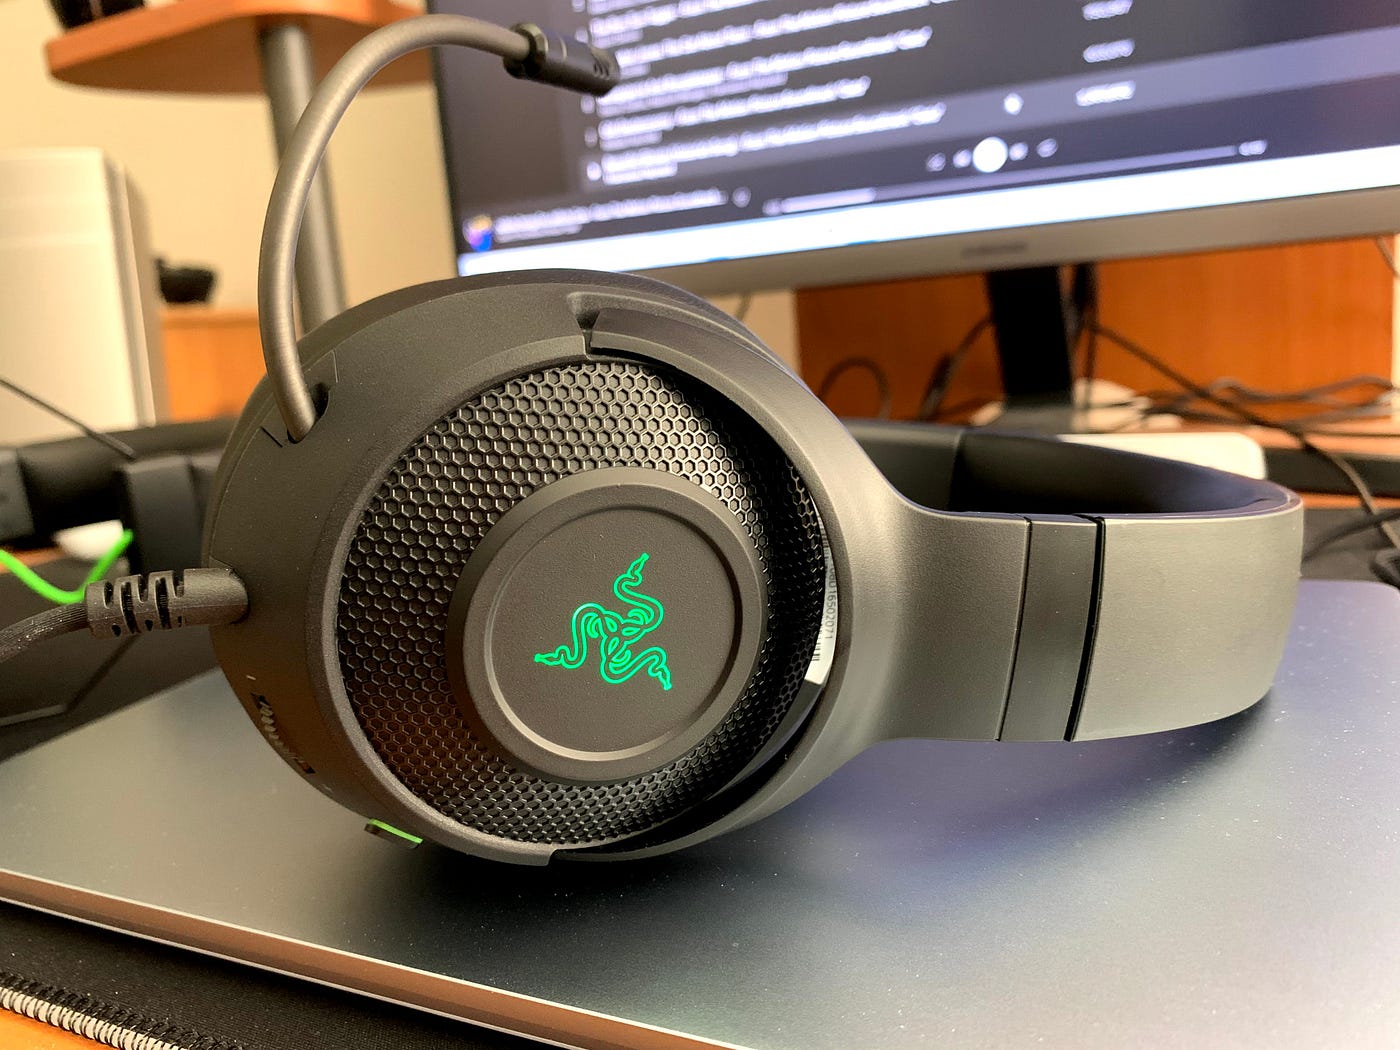 Razer Headset Disconnects: Troubleshooting And Fixes